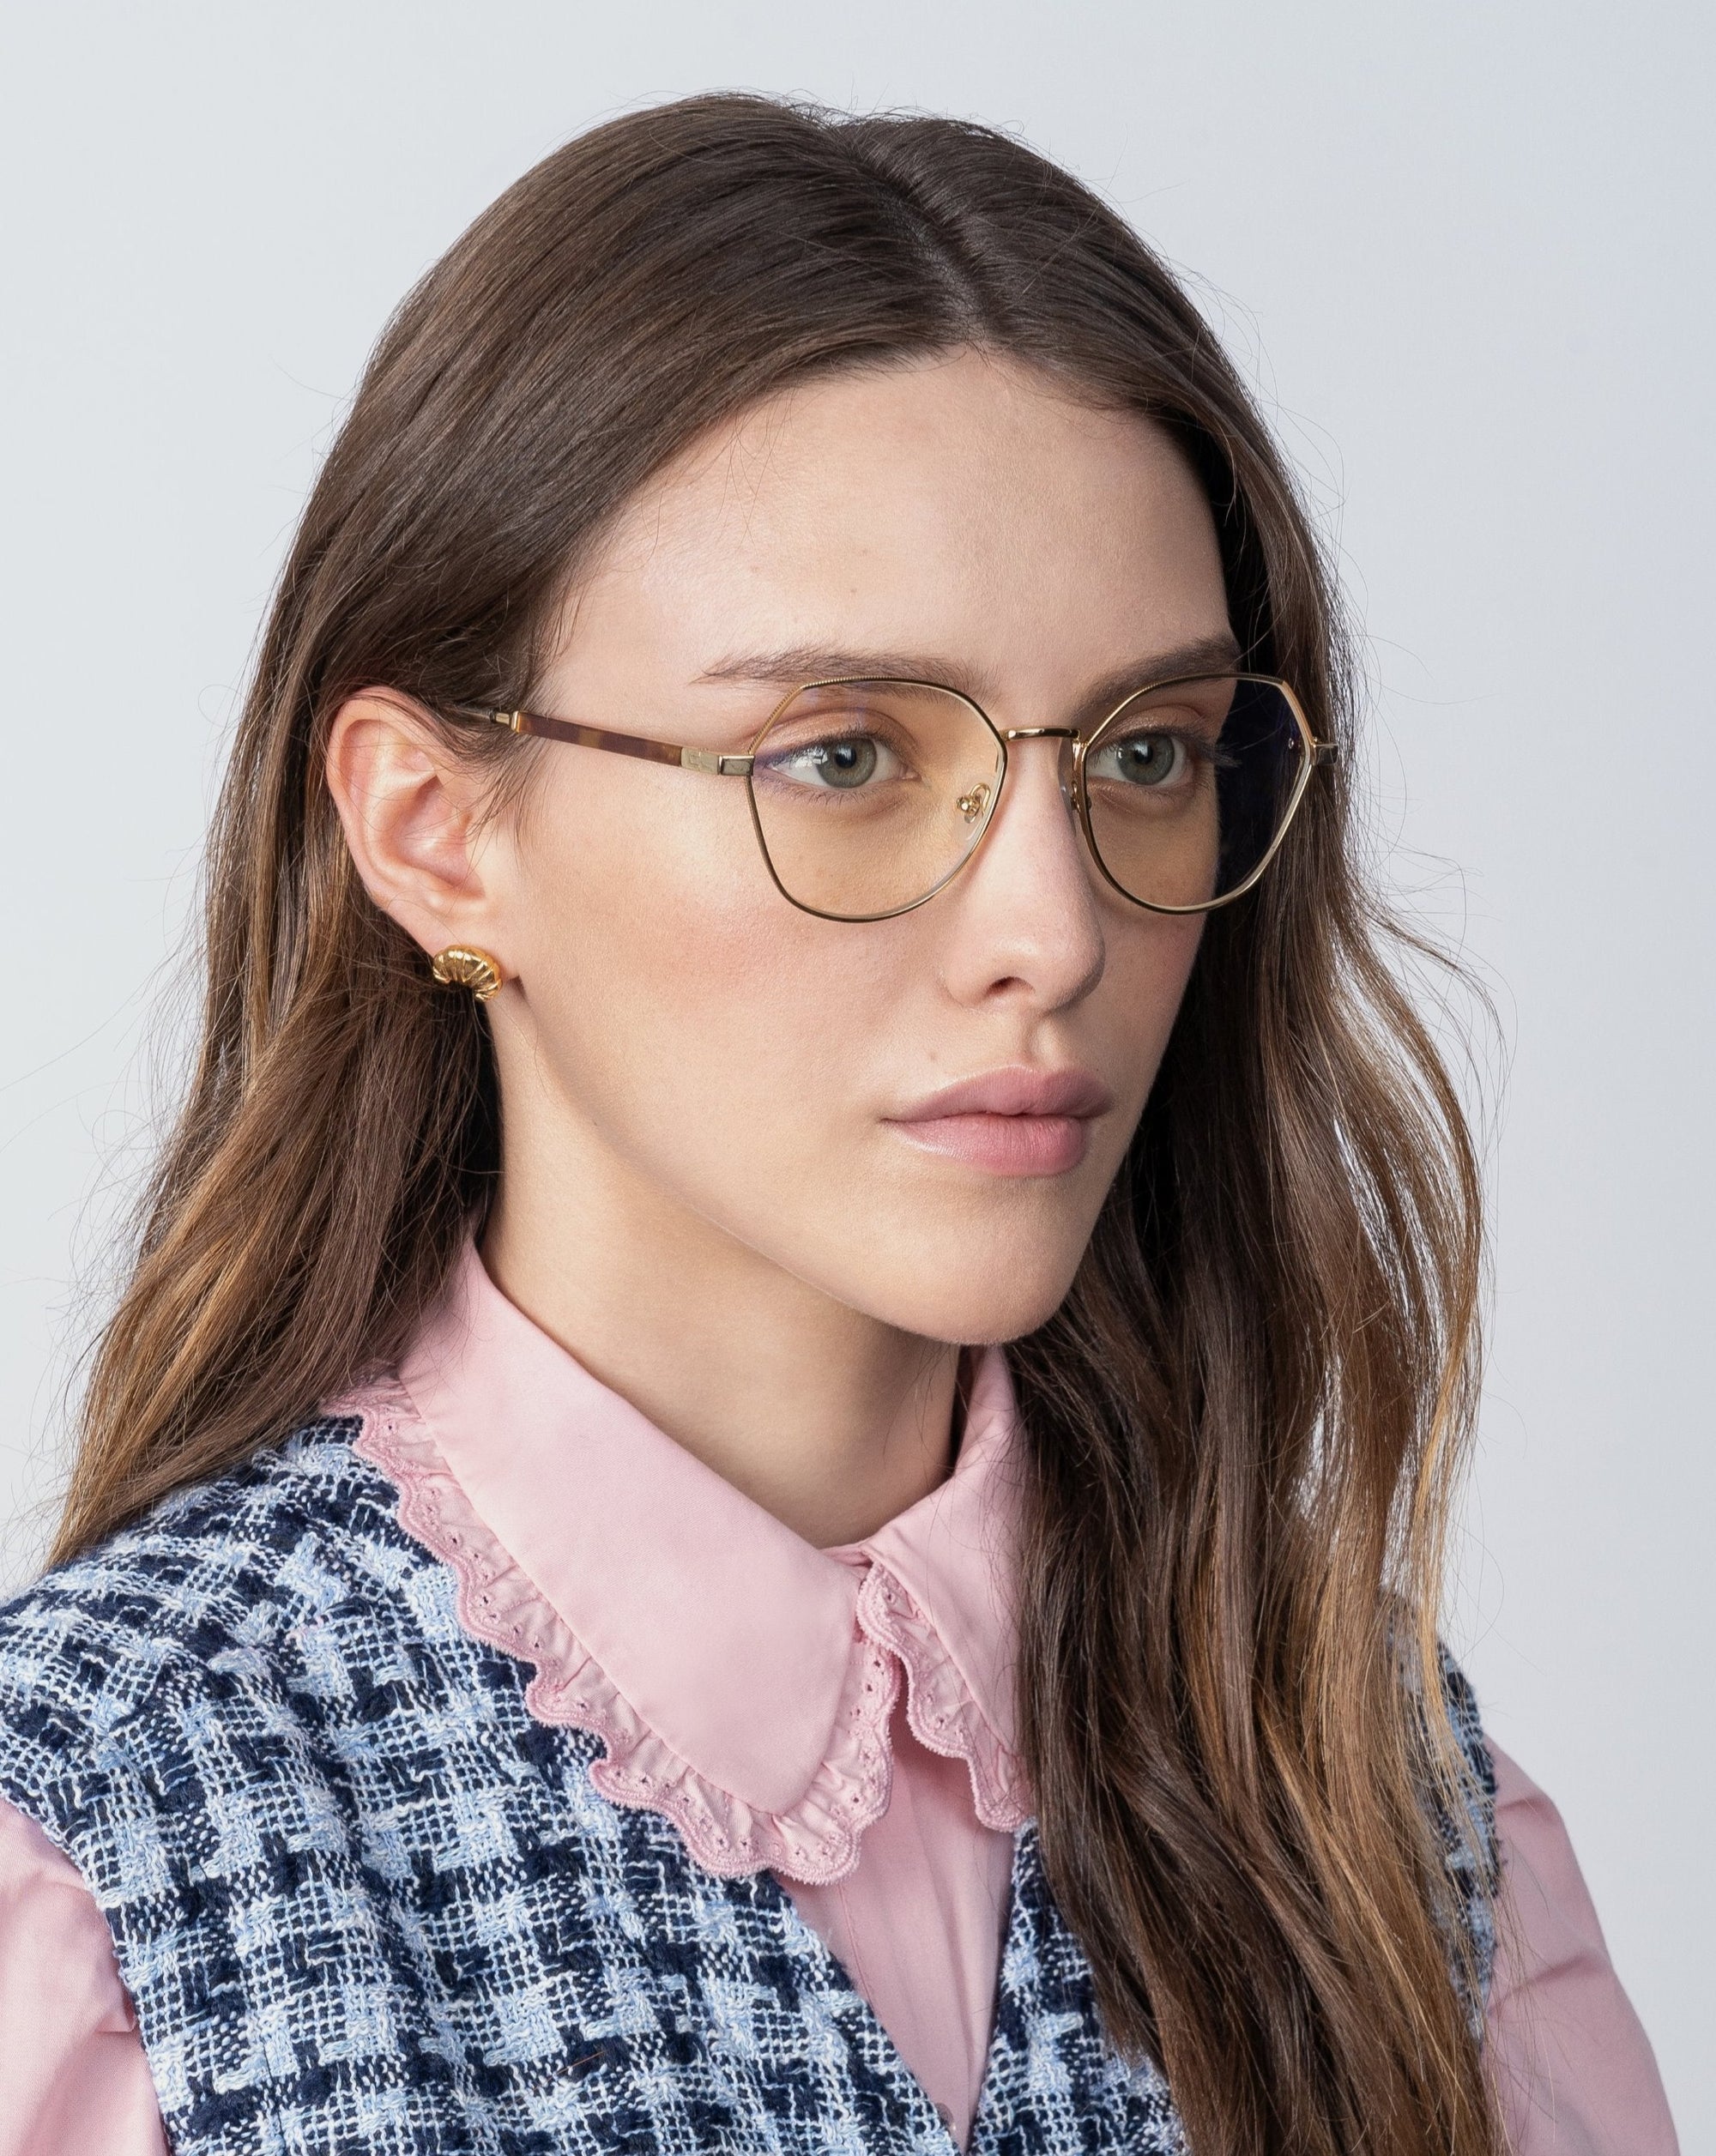 A woman with long, brown hair wearing 18-karat gold-plated glasses and gold earrings. She is dressed in a pink blouse with a lace collar under a blue and white checkered vest. Her glasses have Orchard blue light filter prescription lenses by For Art's Sake®. She has a calm, neutral expression and is facing slightly to the right.